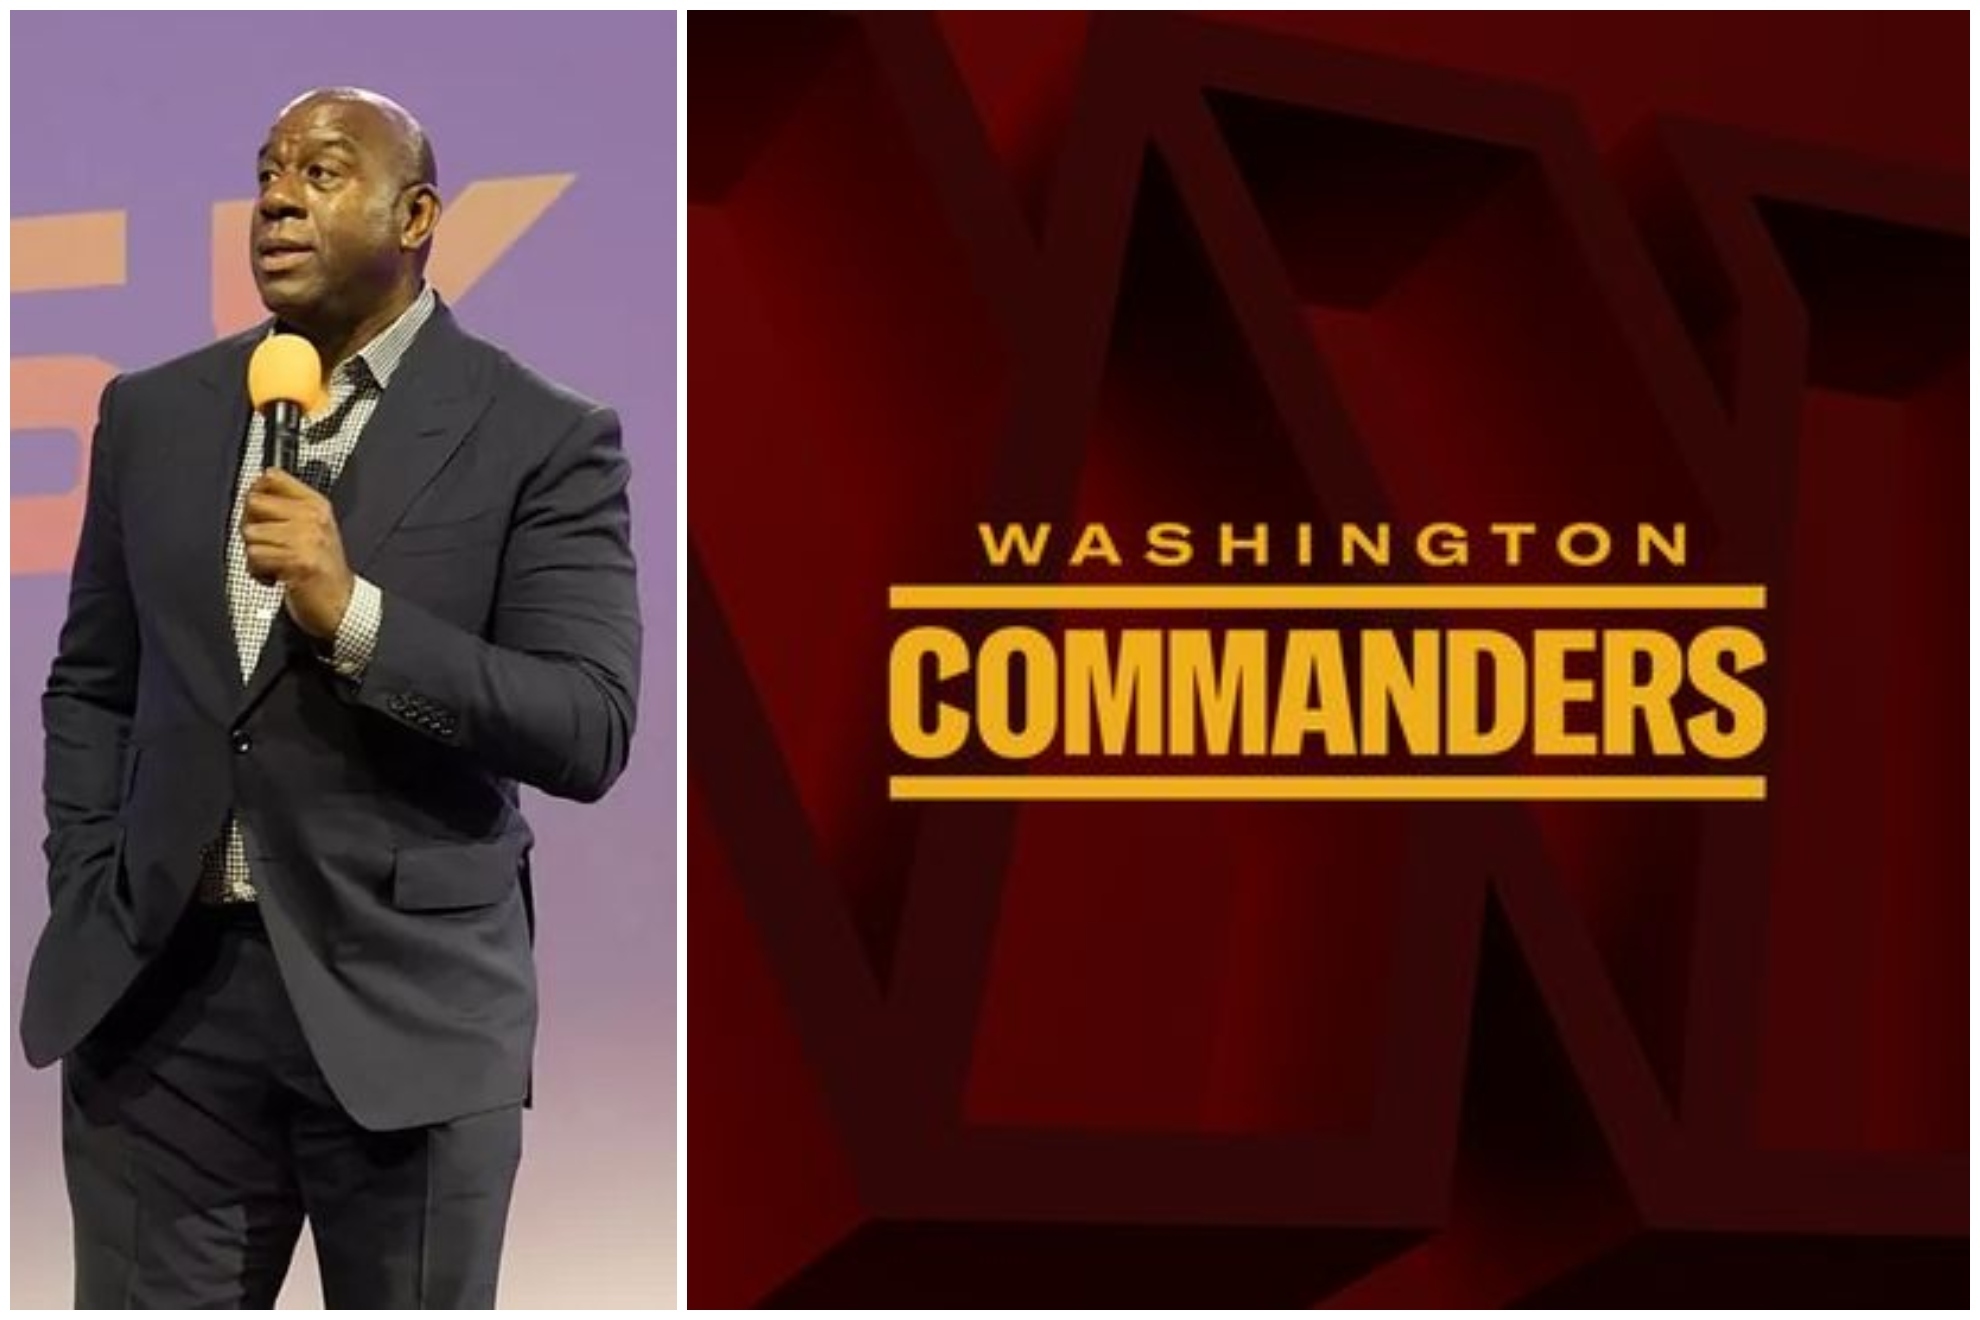 Magic Johnson could buy the Washington Commanders to lead the NFL team to glory